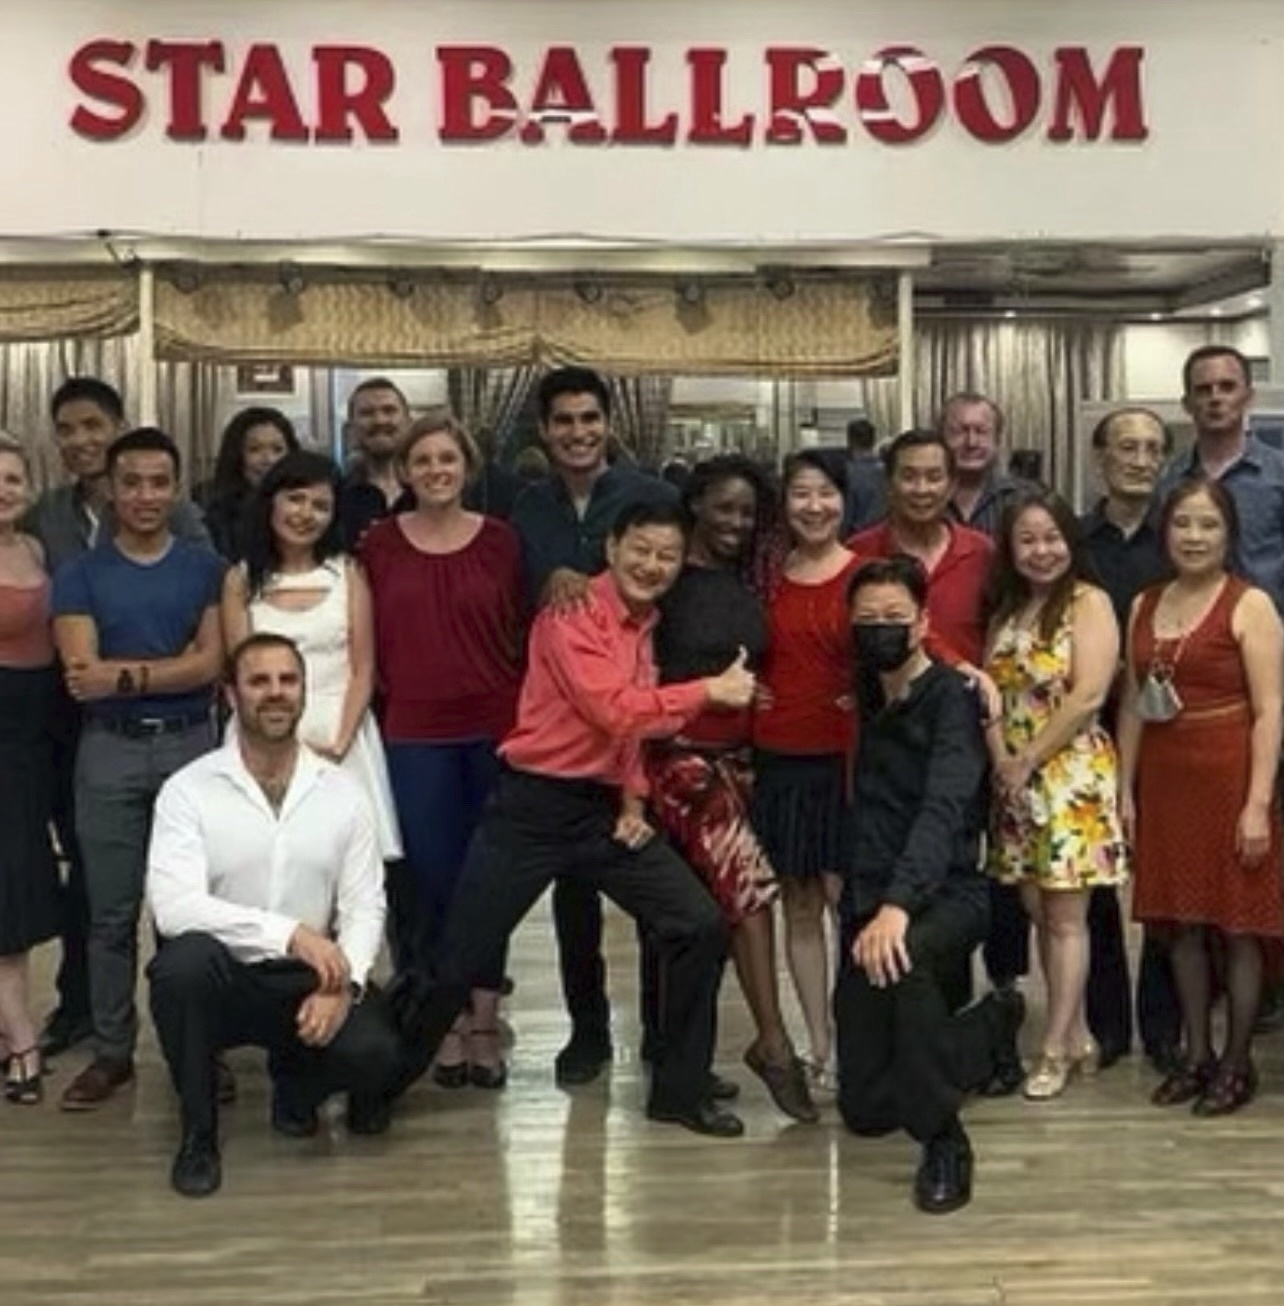 A photo of Mr. Ma, smiling and giving a thumbs up in a red shirt, with a group of community members at a dance event.